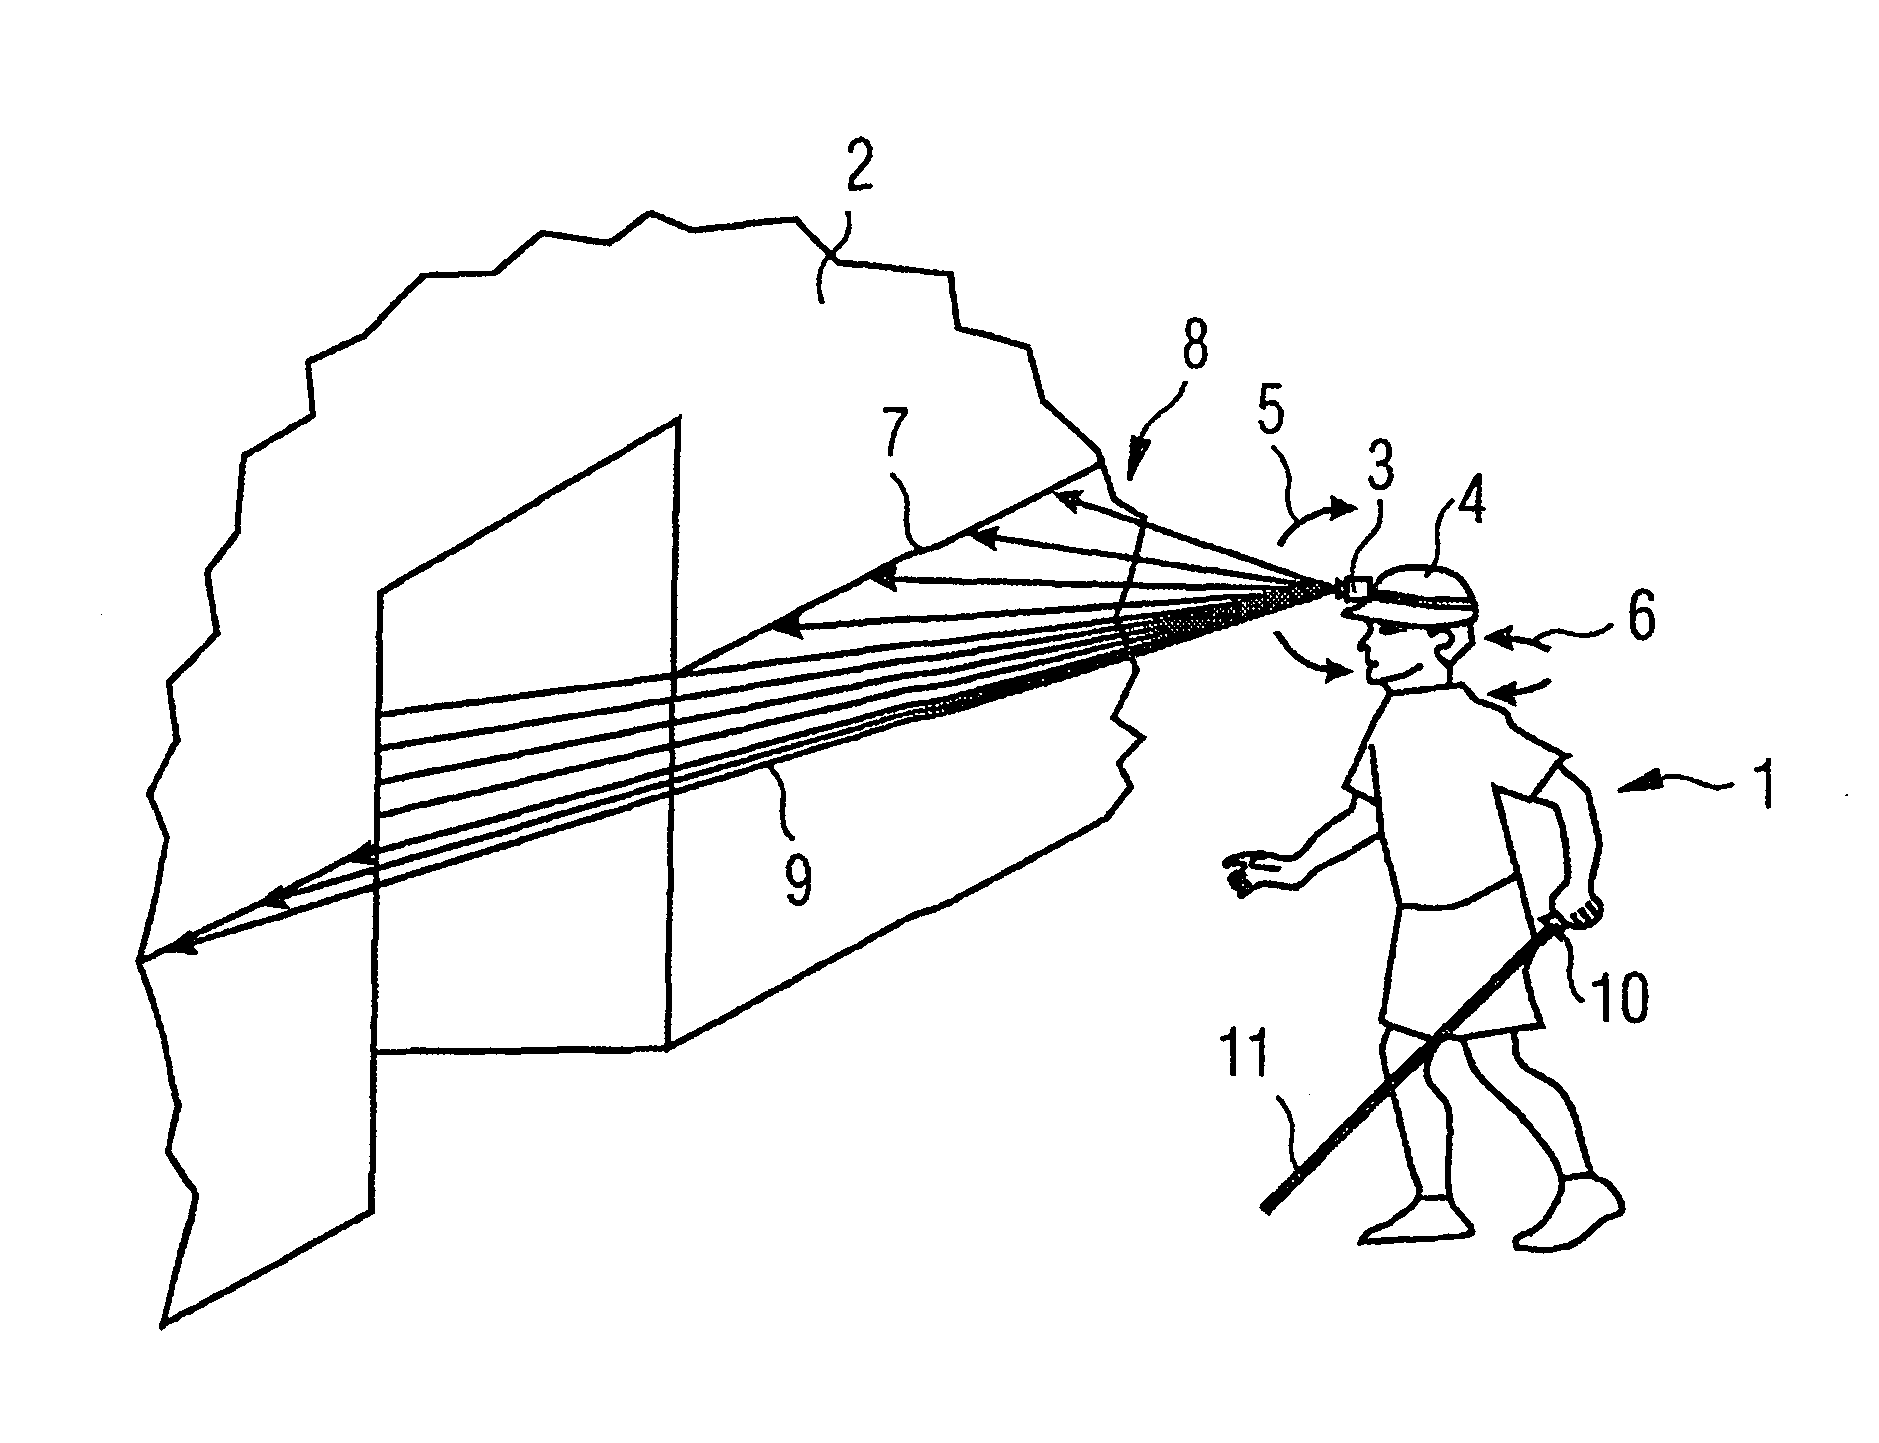 Device for communicating environmental information to a visually impaired person